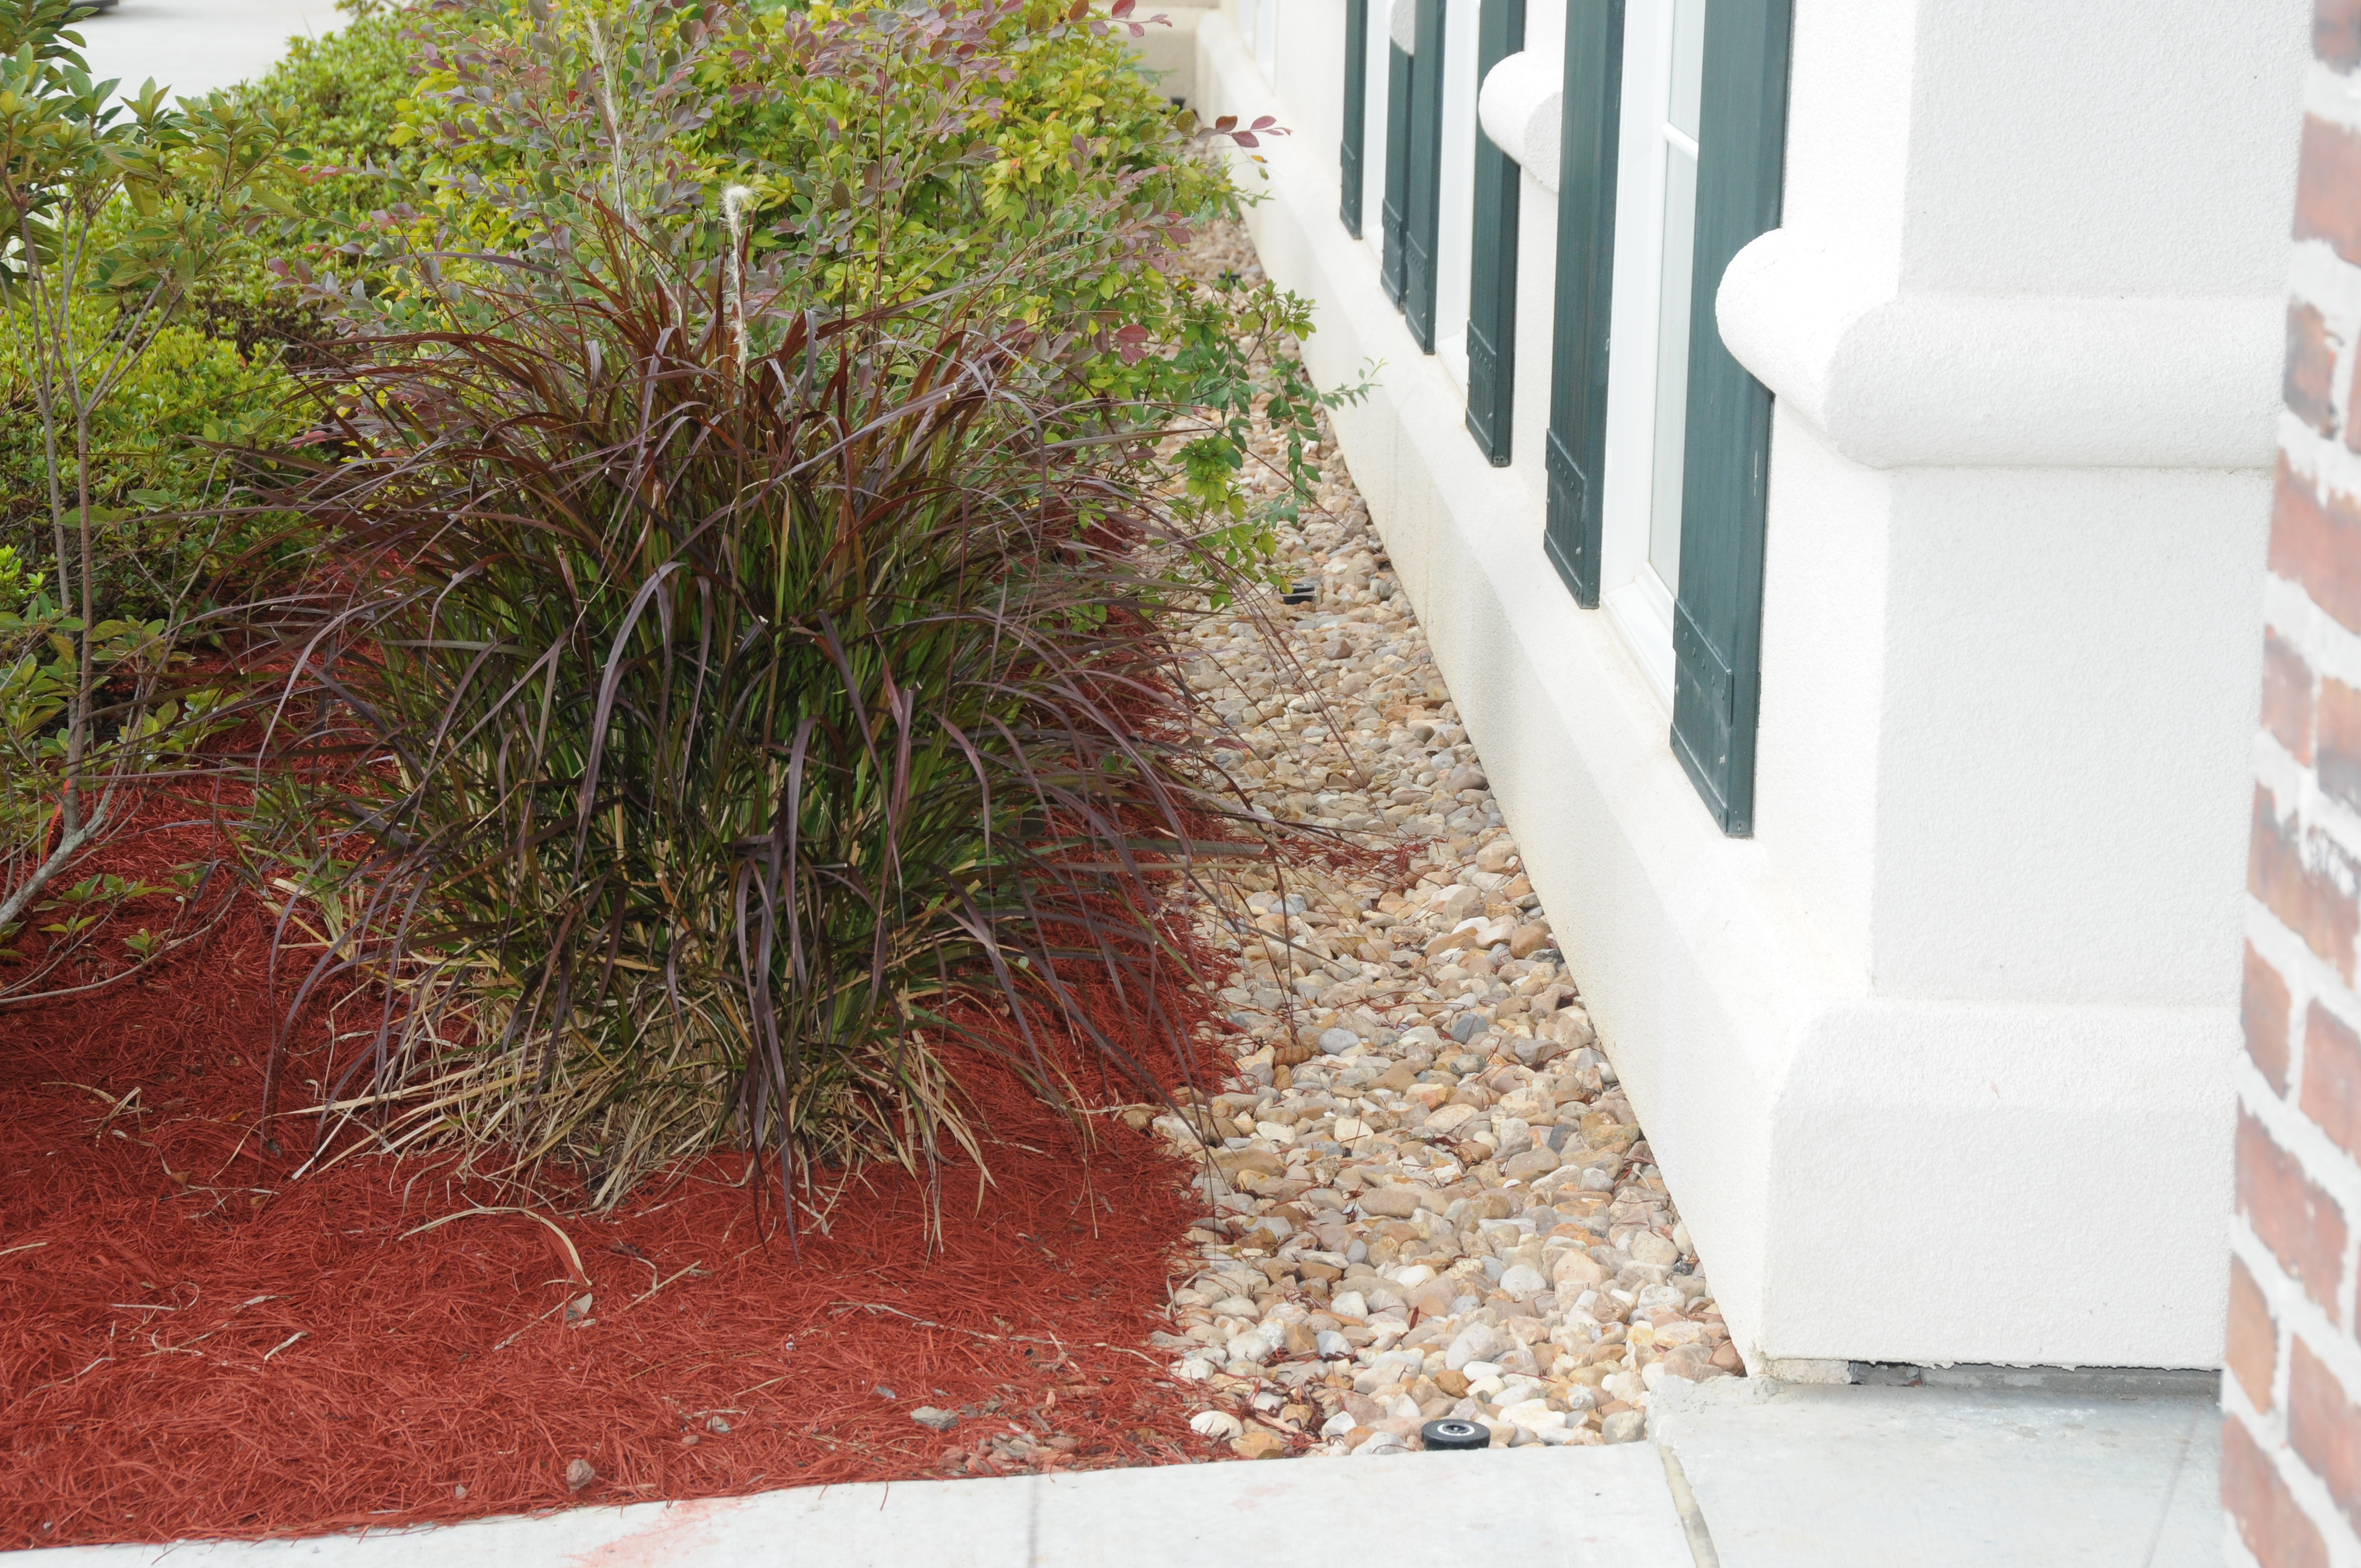 Maintaining a narrow, mulch-free strip along the foundation of a building helps reduce risks of termite infestation.